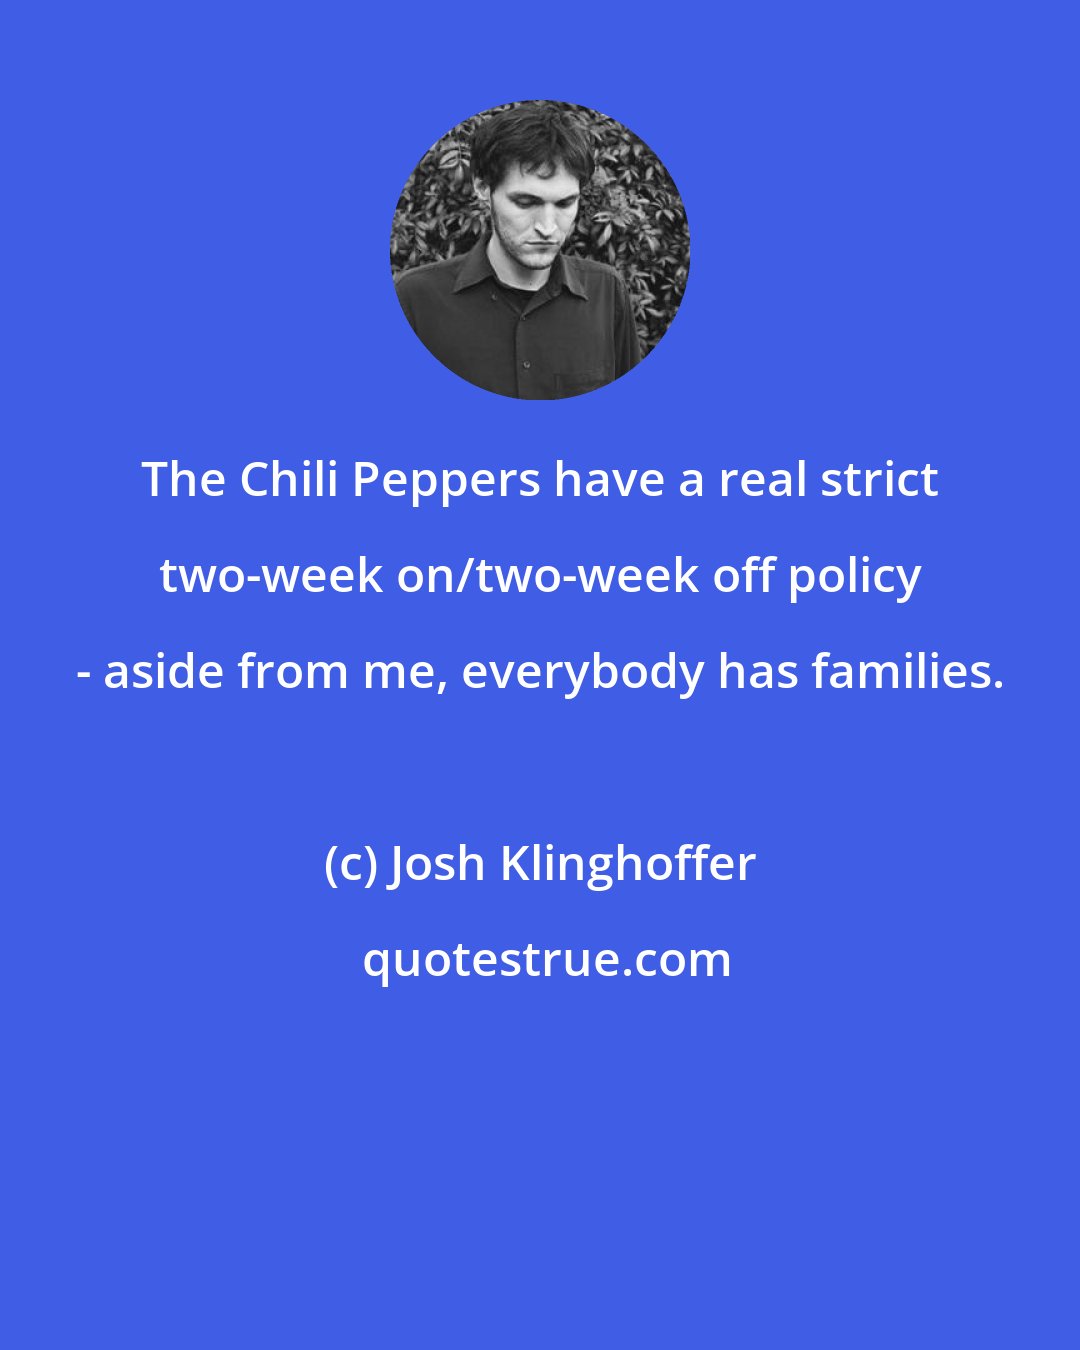 Josh Klinghoffer: The Chili Peppers have a real strict two-week on/two-week off policy - aside from me, everybody has families.